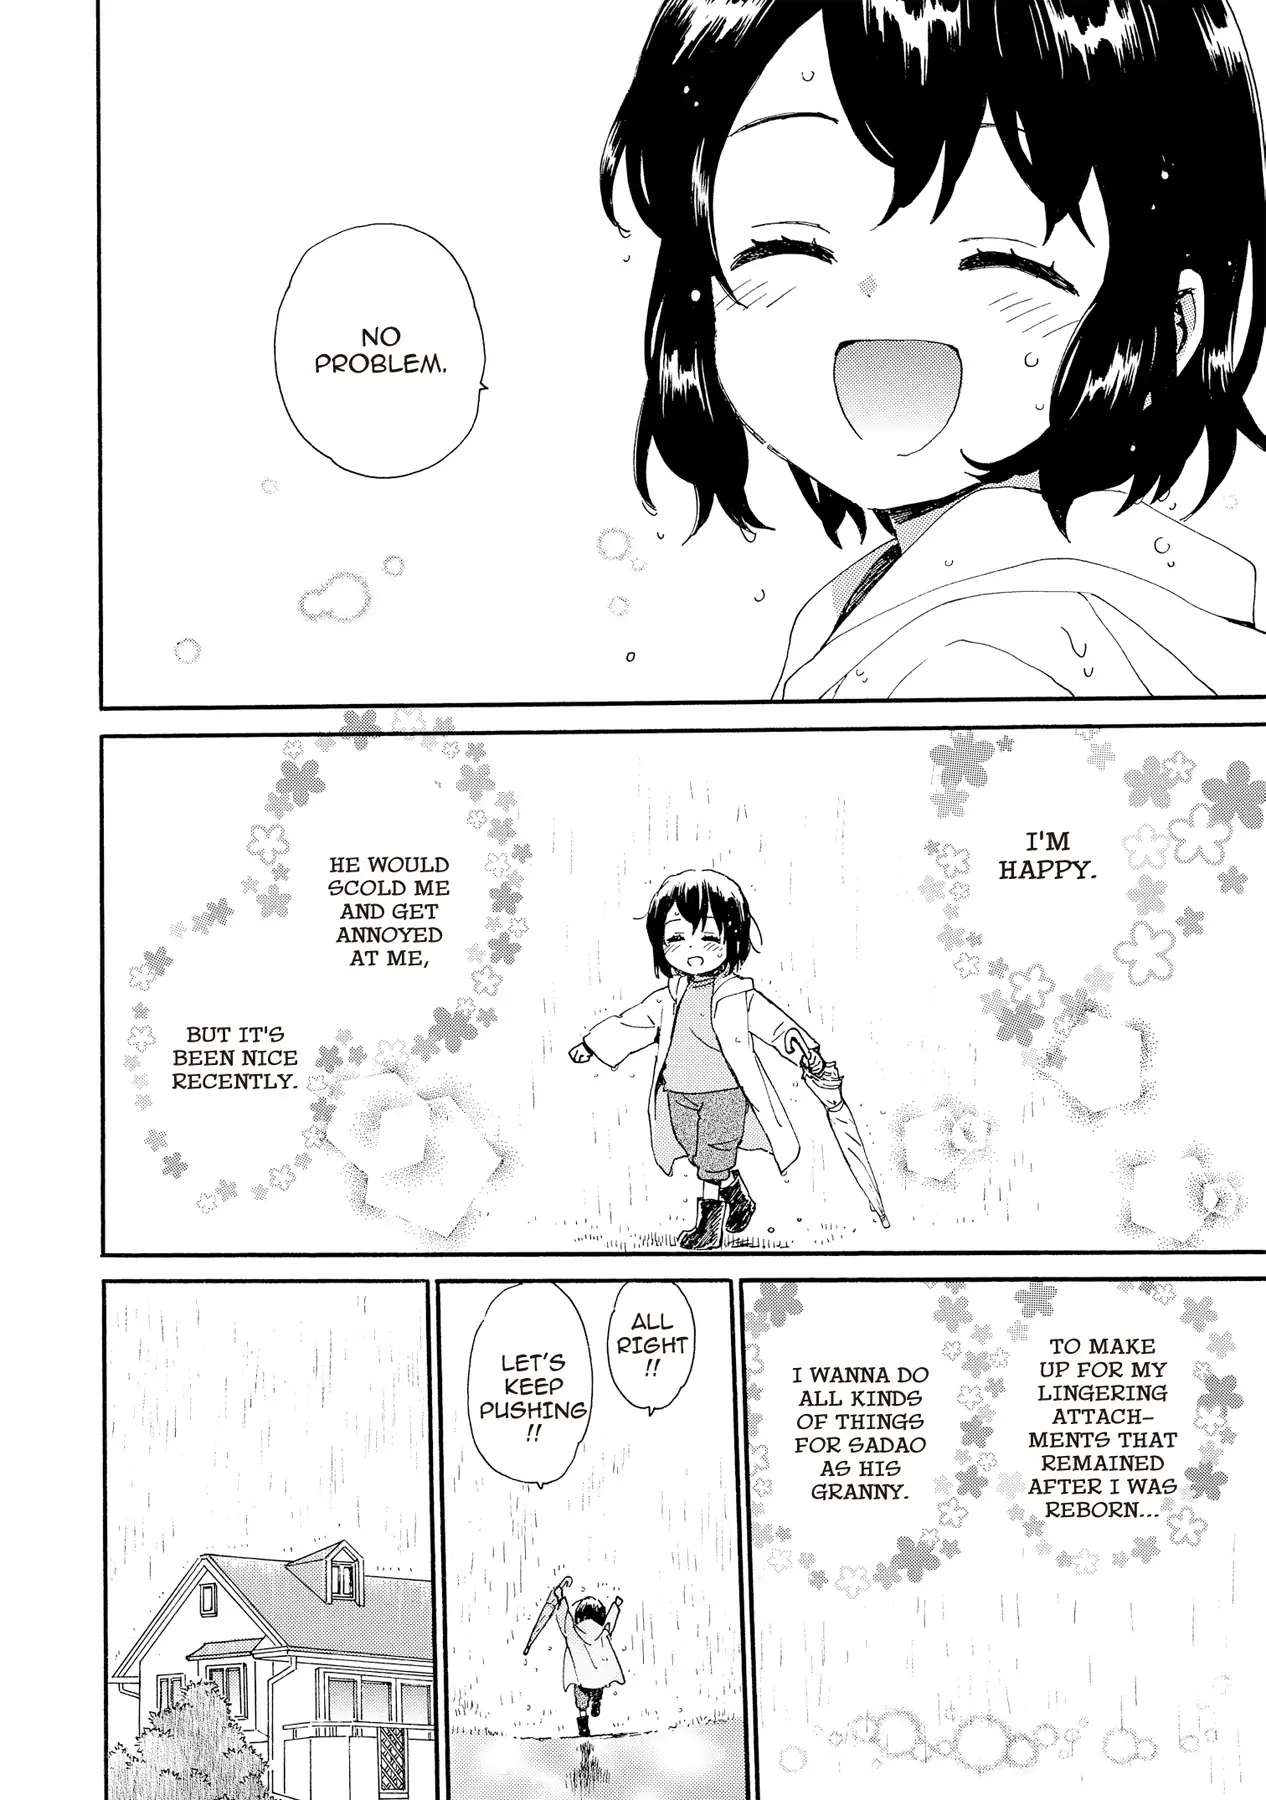 The Cute Little Granny Girl Hinata-chan - chapter 90 - #5